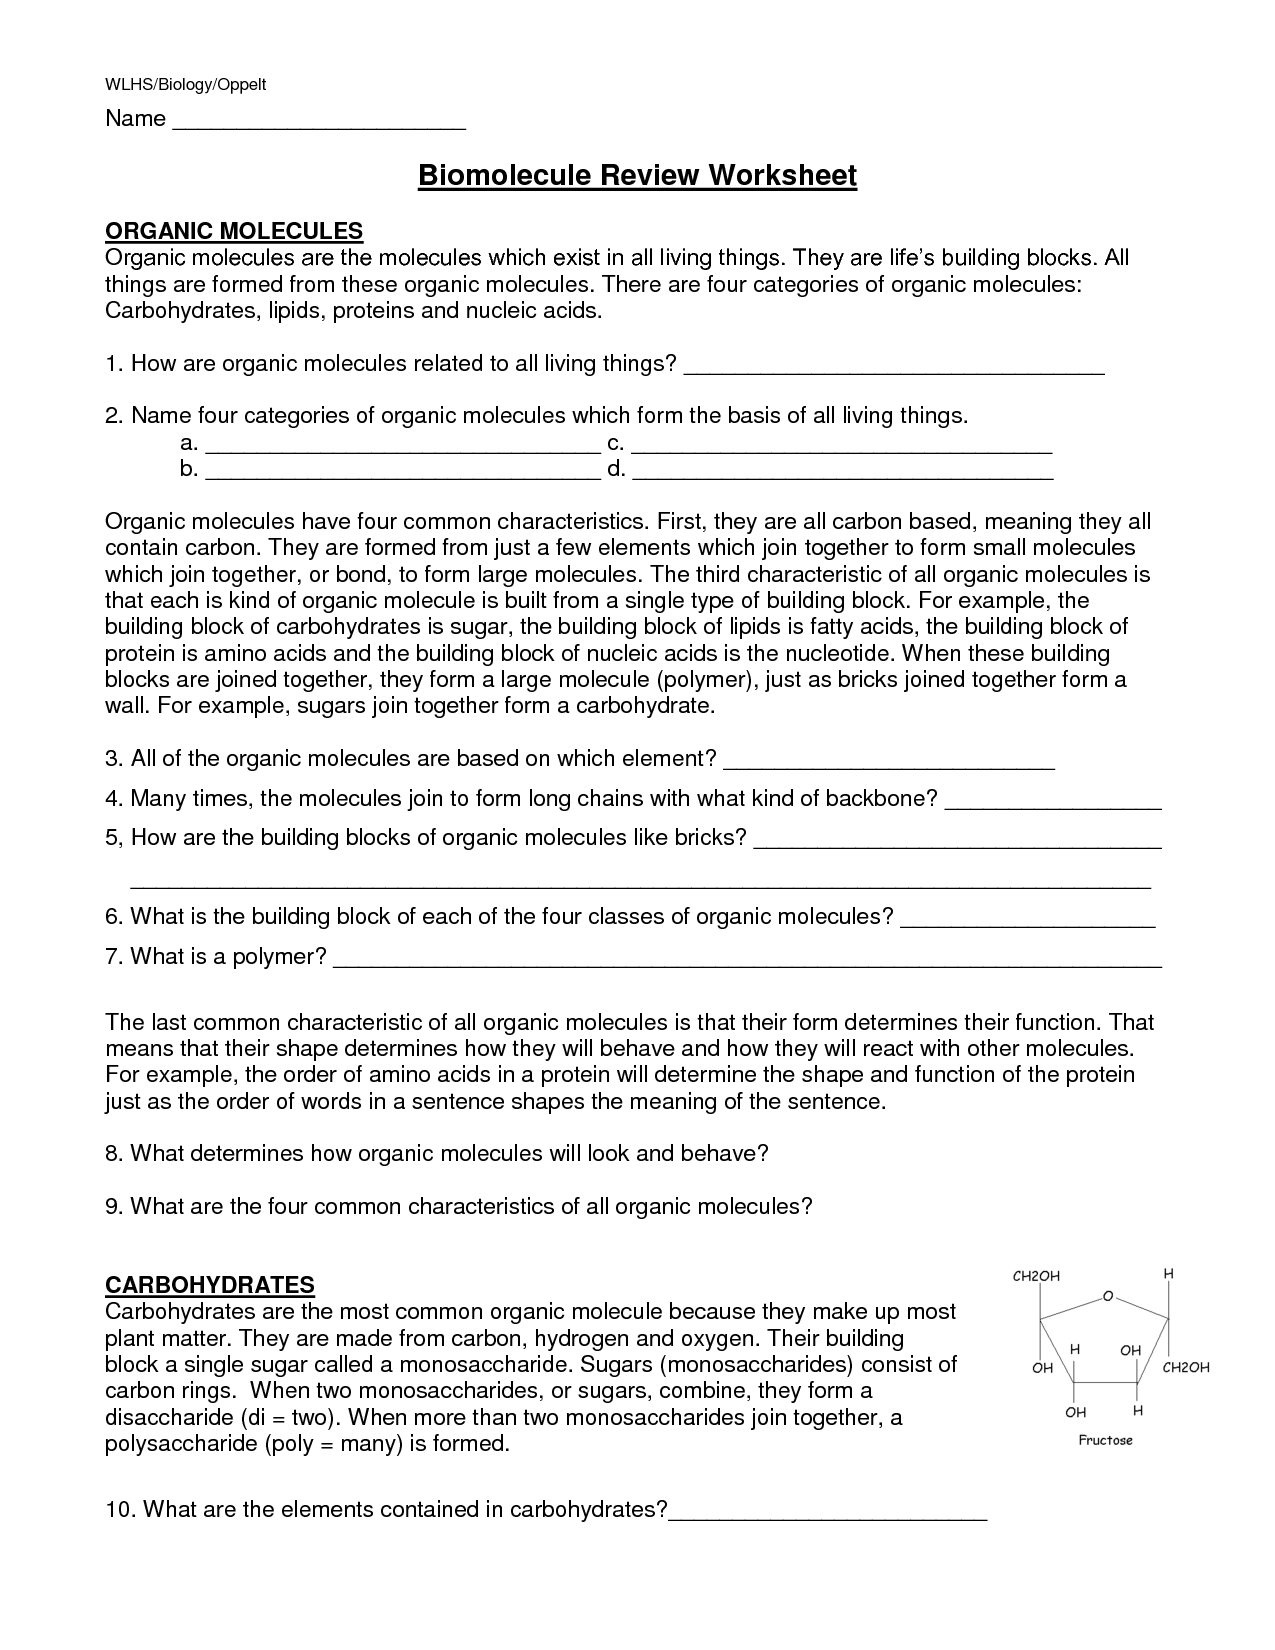 14 Images of Biology Macromolecules Worksheets And Answers